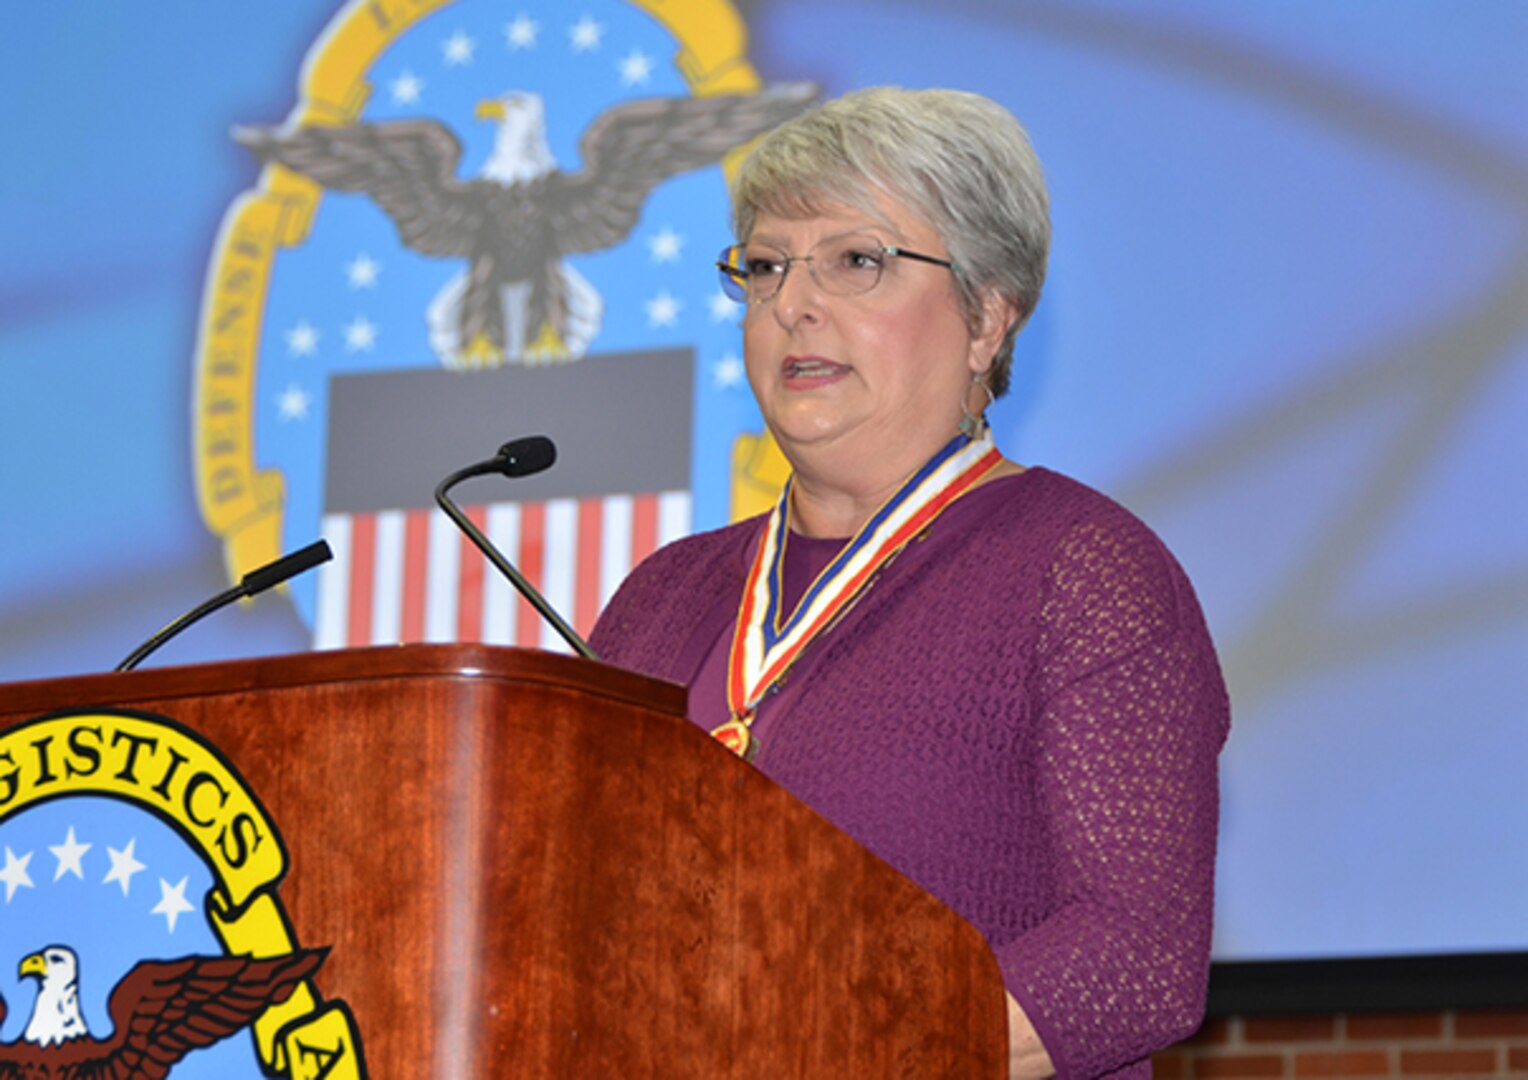 Defense Logistics Agency Aviation inducted its 35th Hall of Fame recipient, Carolynn Michel during a ceremony Sept. 27, 2017 in the Frank B. Lotts Conference Center on Defense Supply Center Richmond, Virginia.